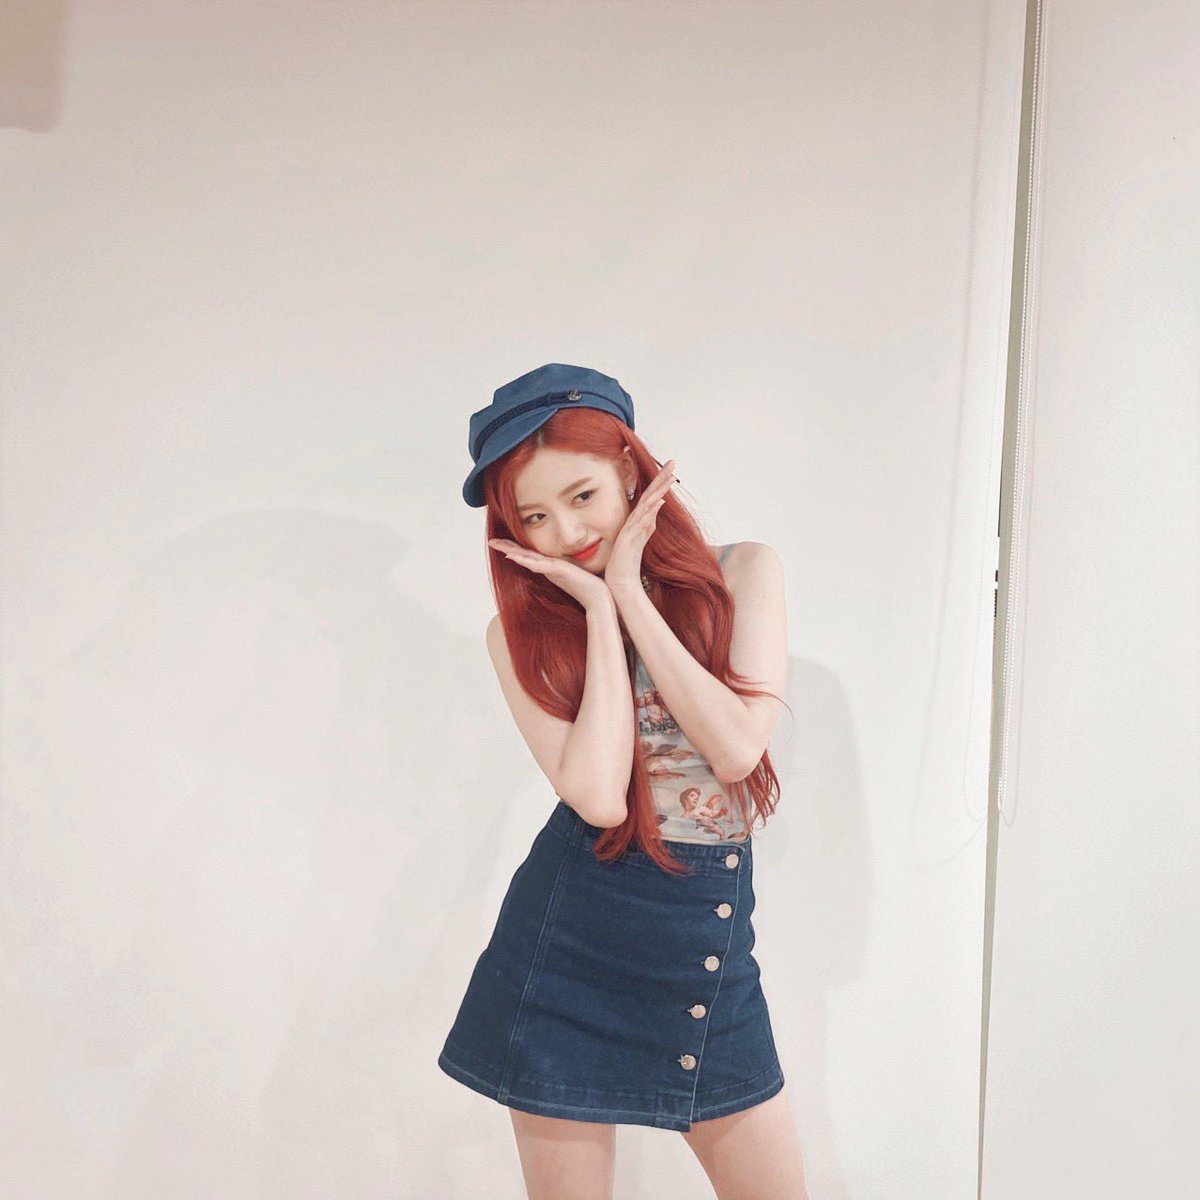 3. Backstage Pics • Her outfit is really cute, but seems almost too cute, like it’s obvious it was styled • The red hair might seem fishy since its not really a natural color • adorable rating: 5/10